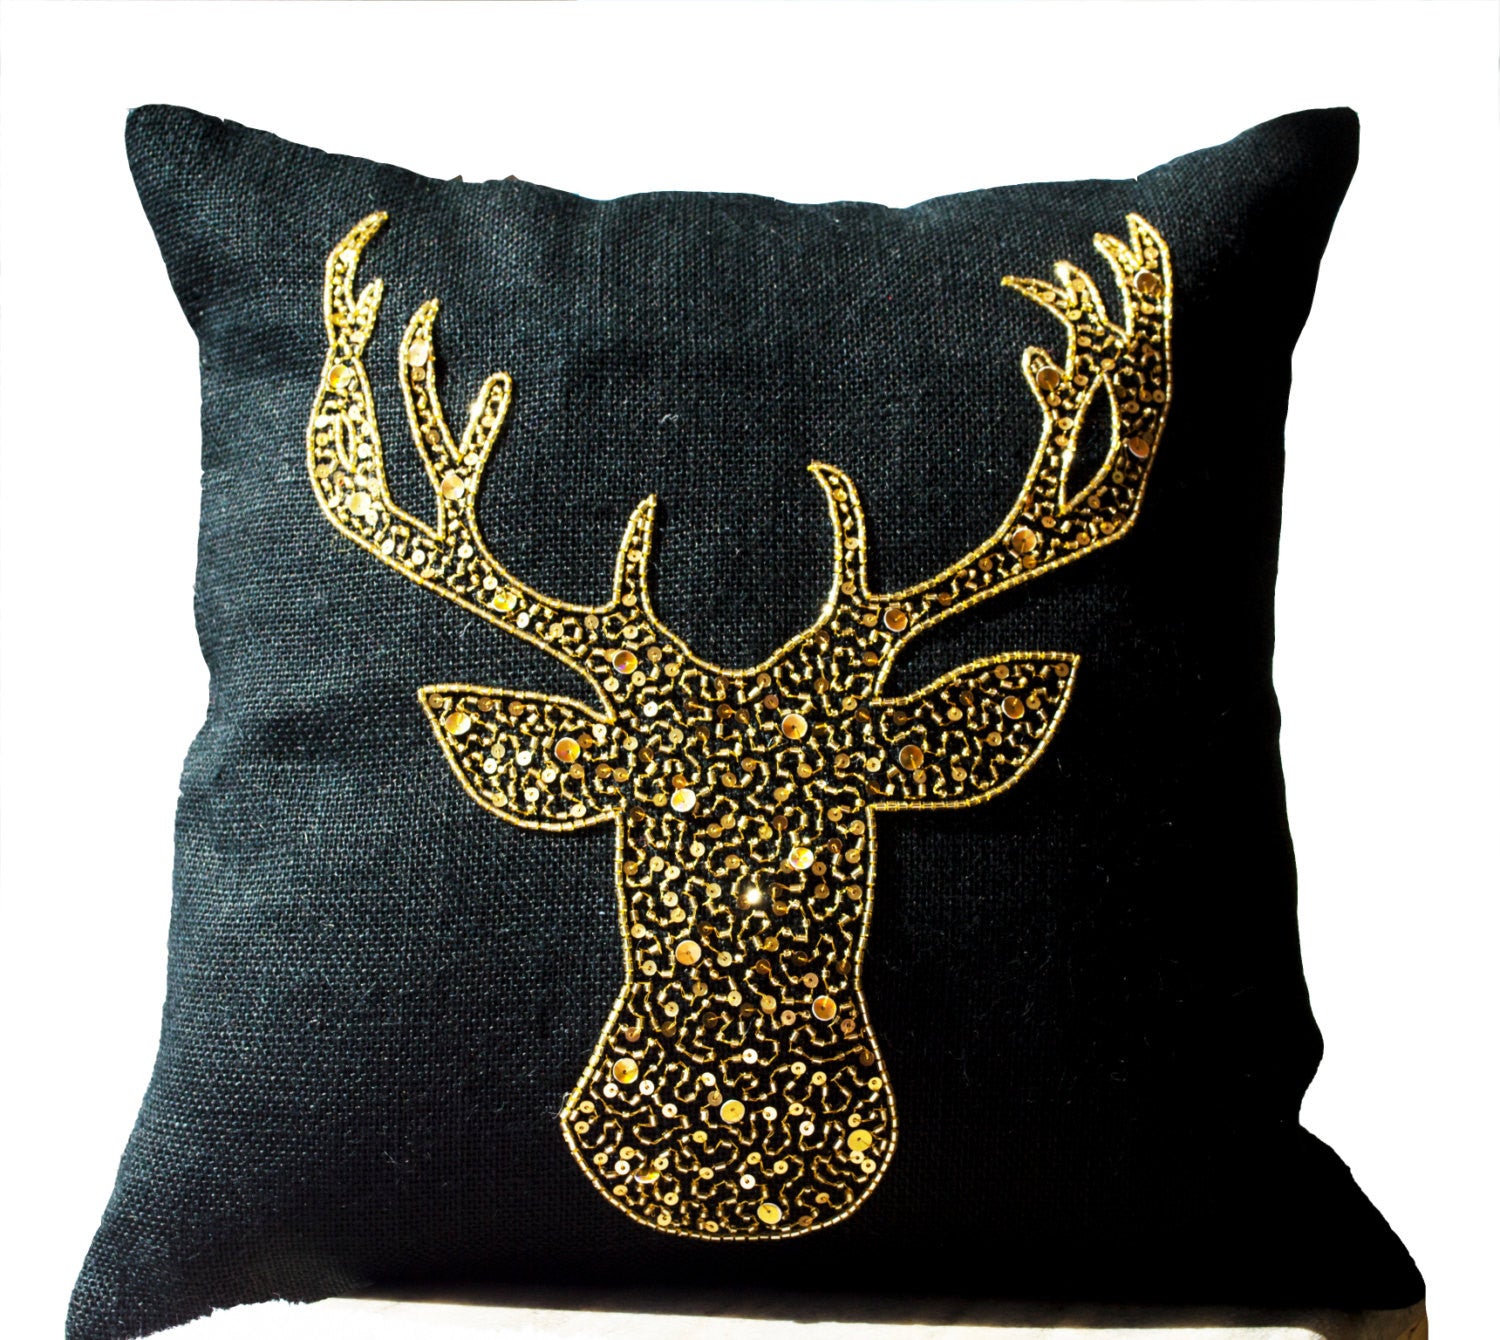 Handmade pillows with deer design and gold sequin embroidery